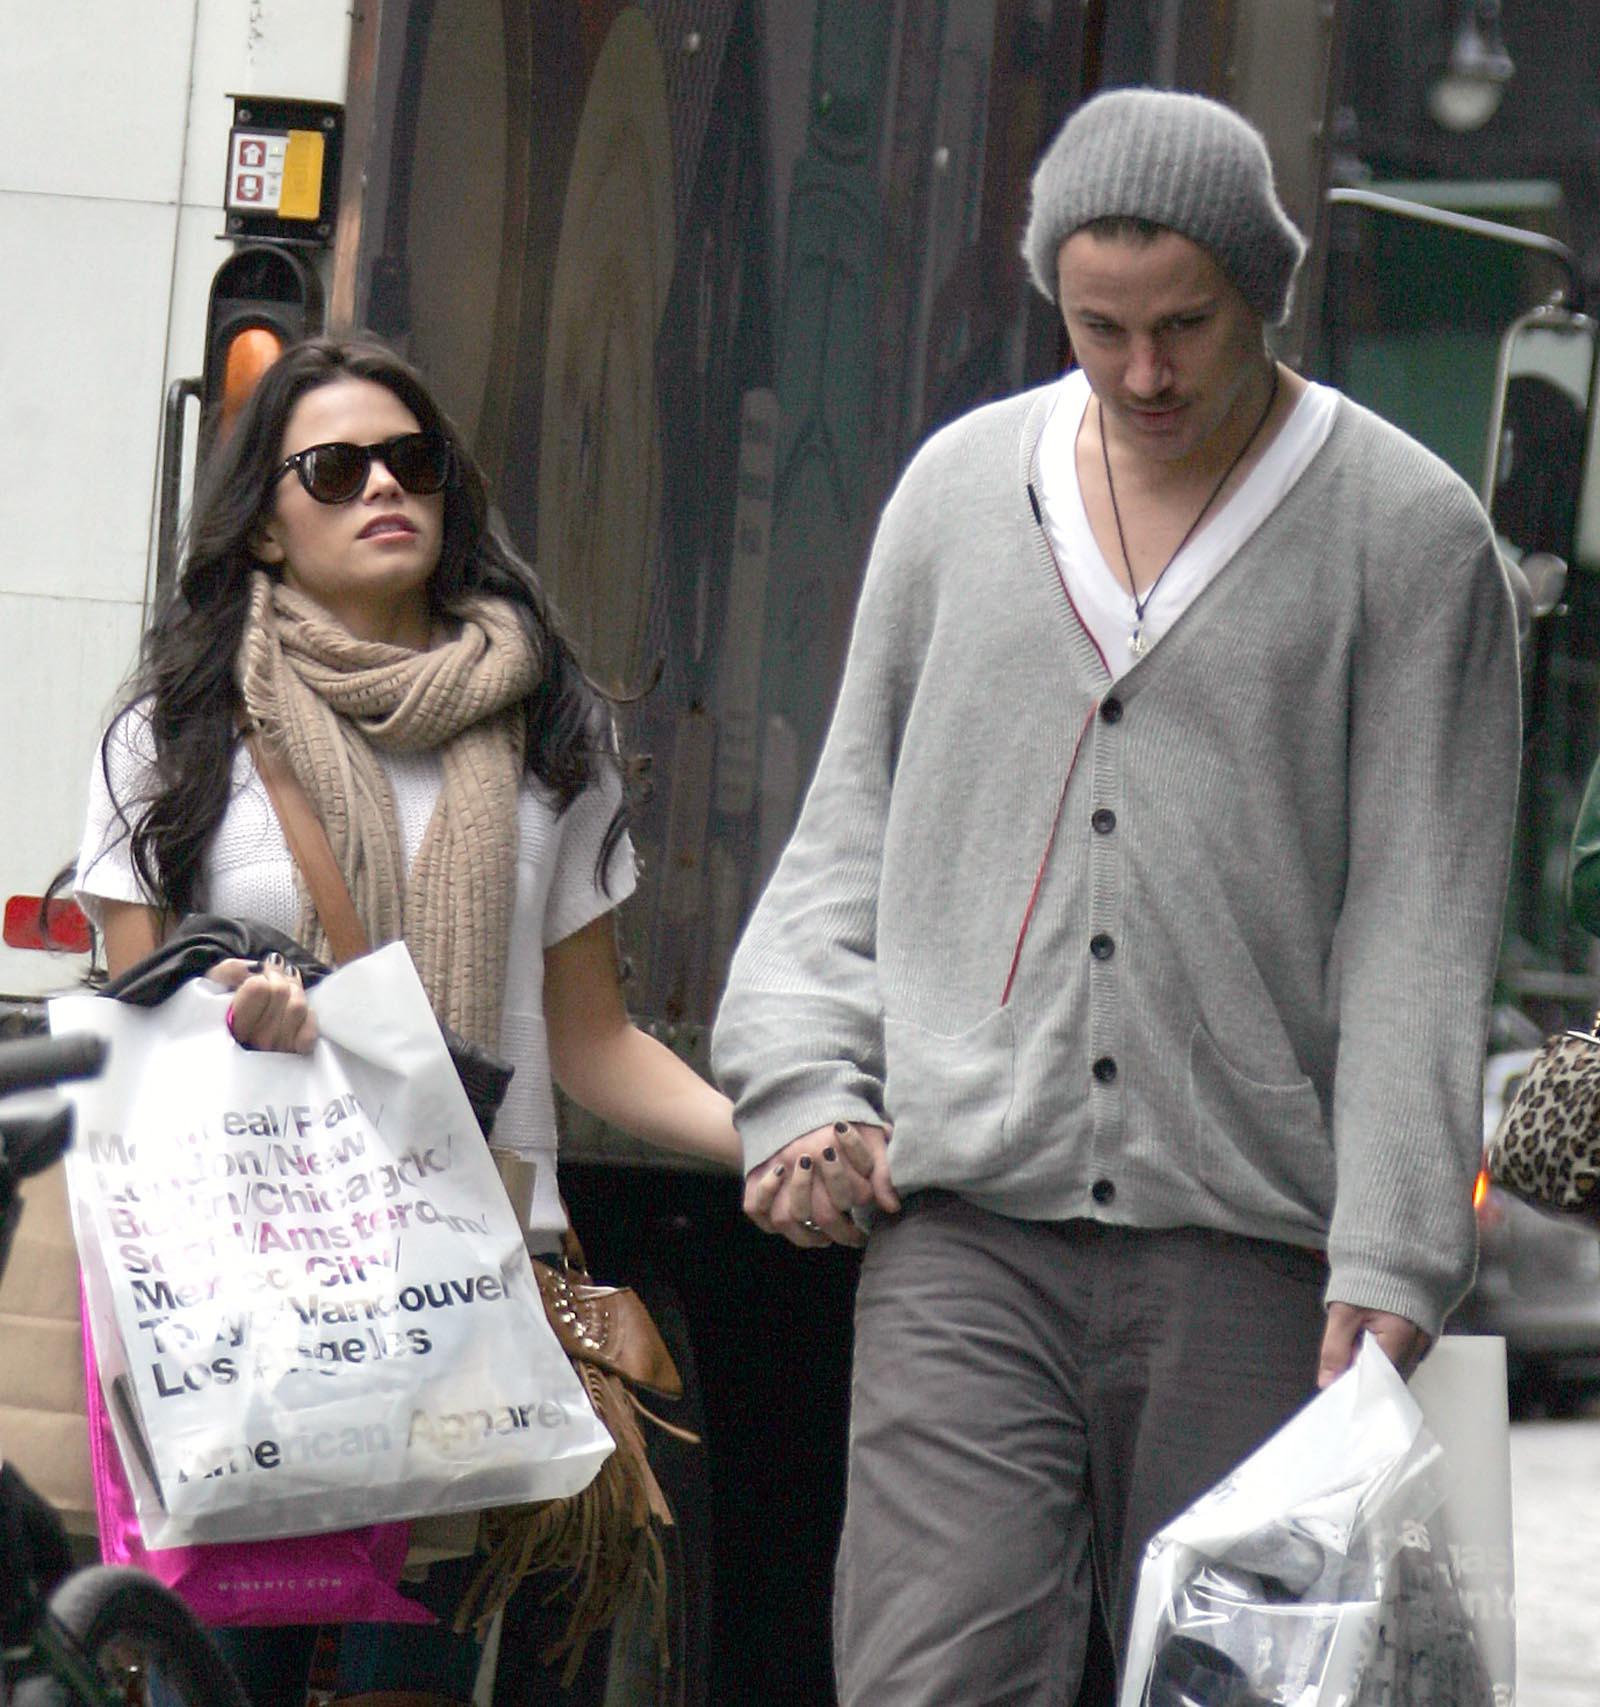 CHANNING TATUM AND WIFE JENNA DEWAN SHOPPING IN NY